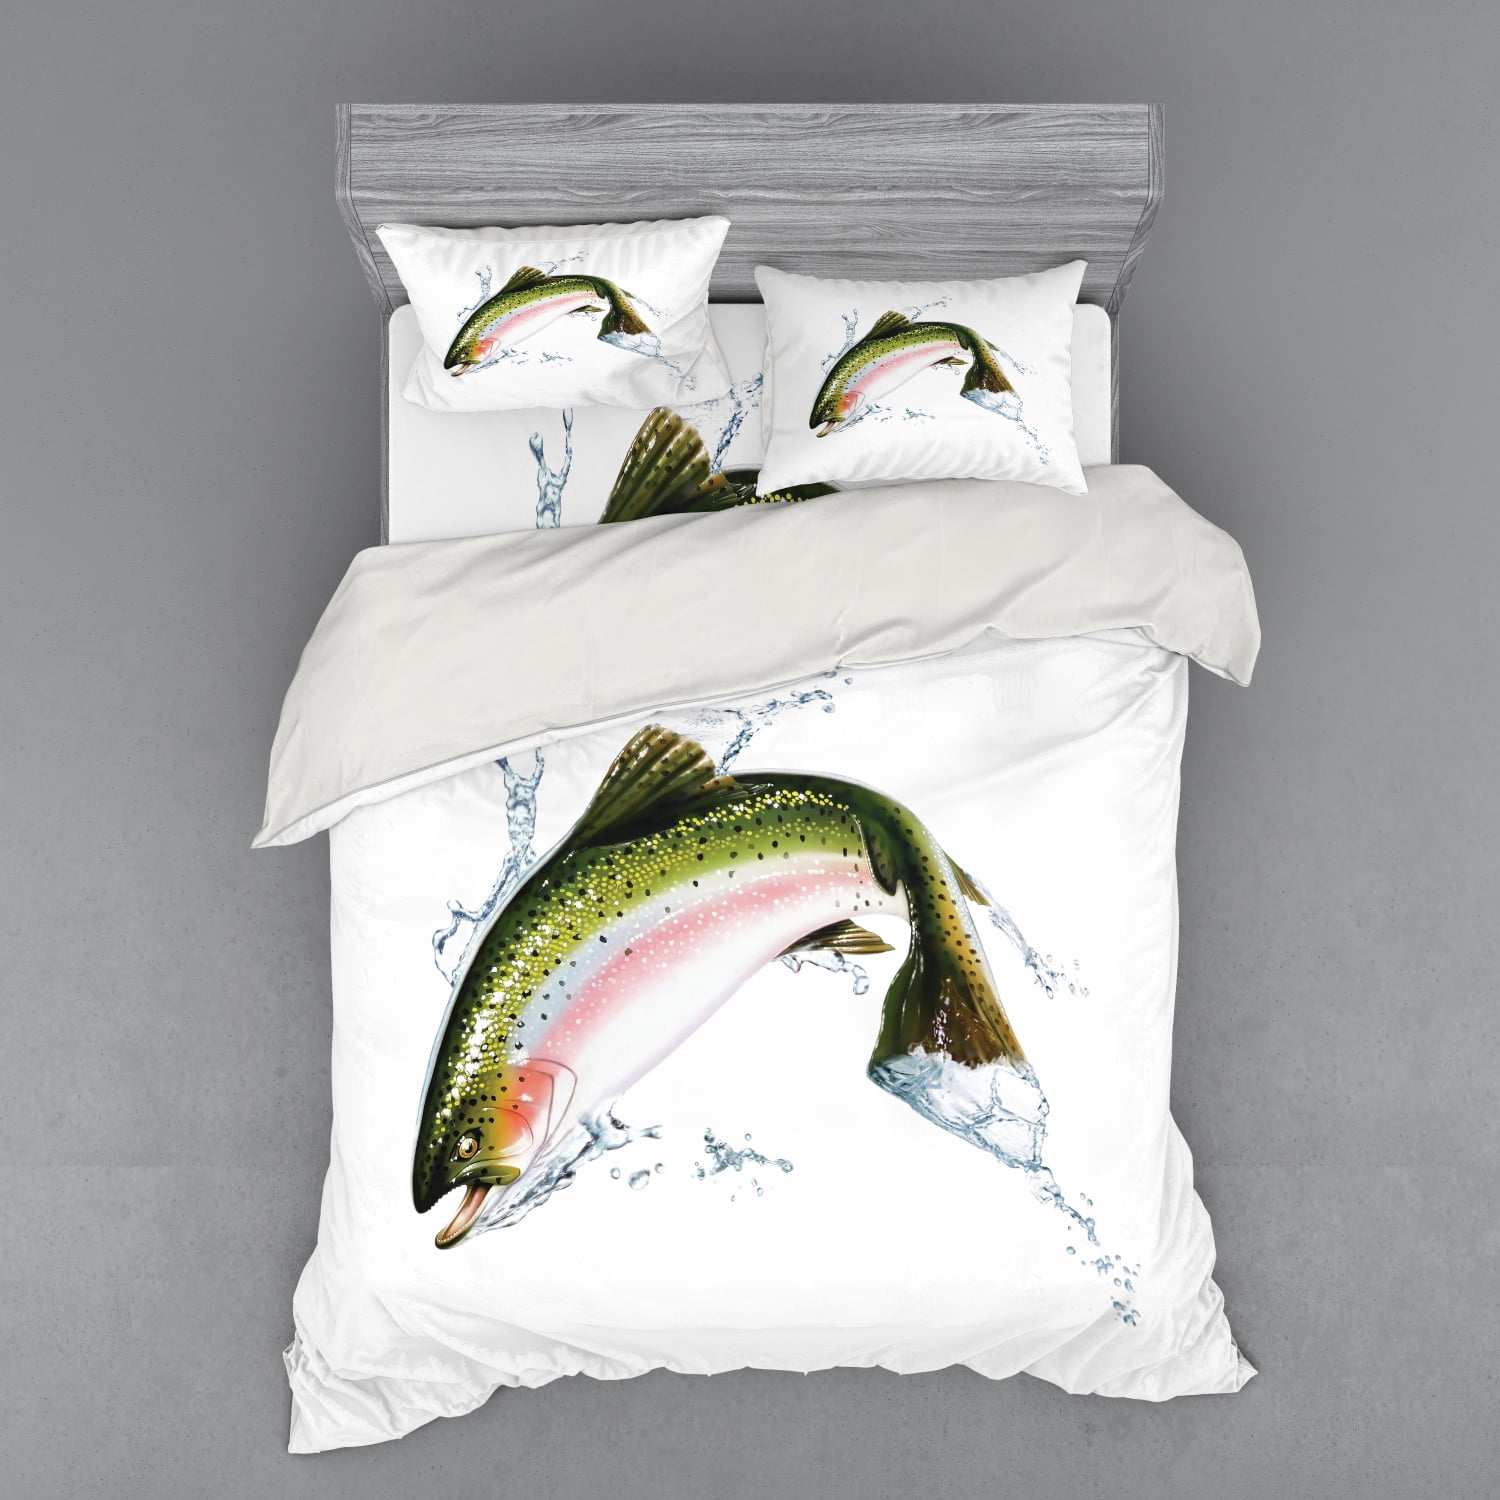 Fish Duvet Cover Set, Salmon Jumping out of Water Making Splashes Cartoon Design Photorealistic